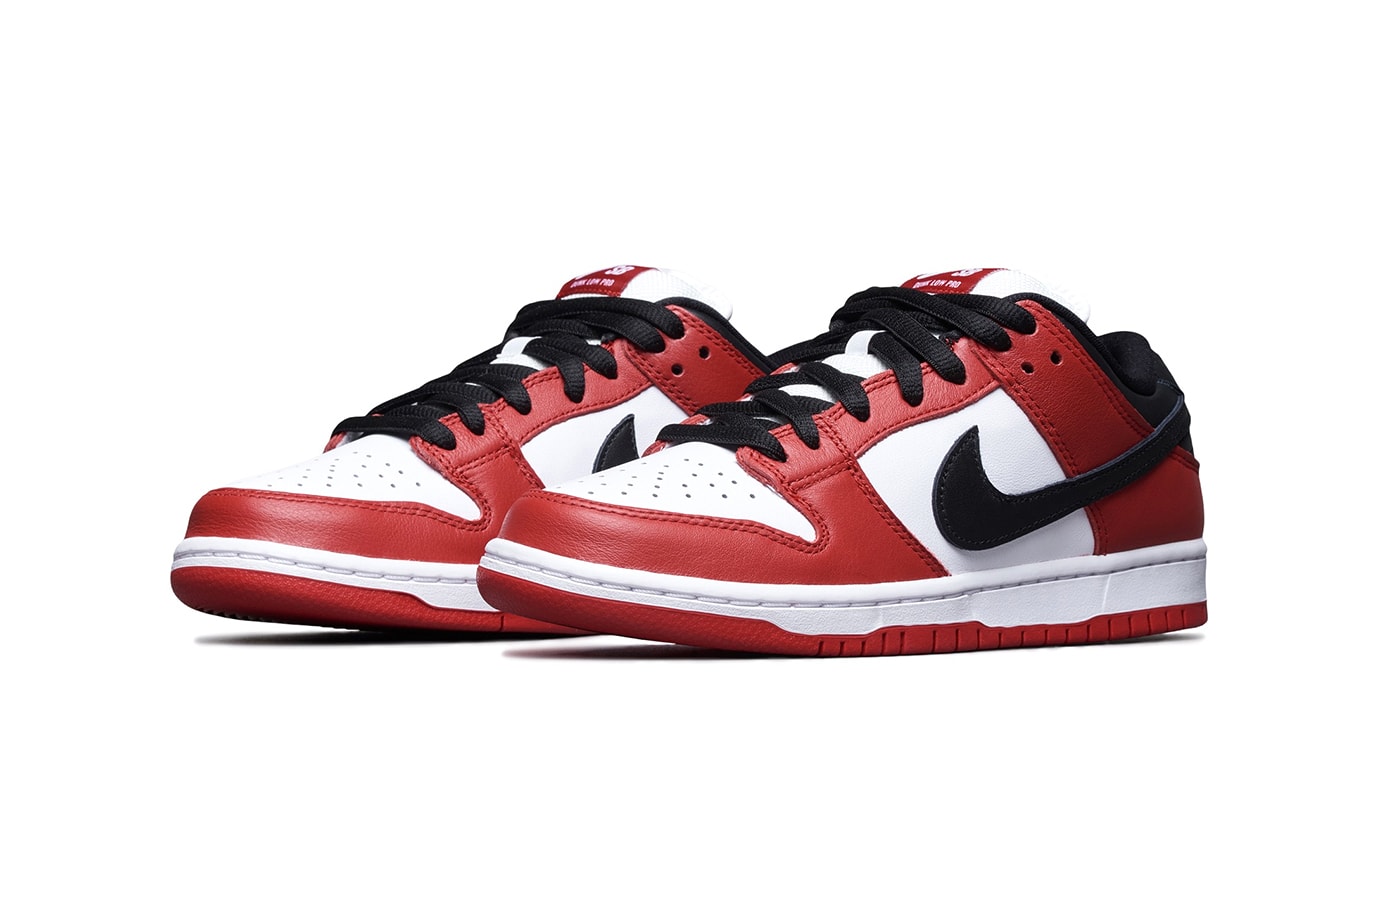 nike sb dunk low j pack chicago release info footwear shoes sneakers